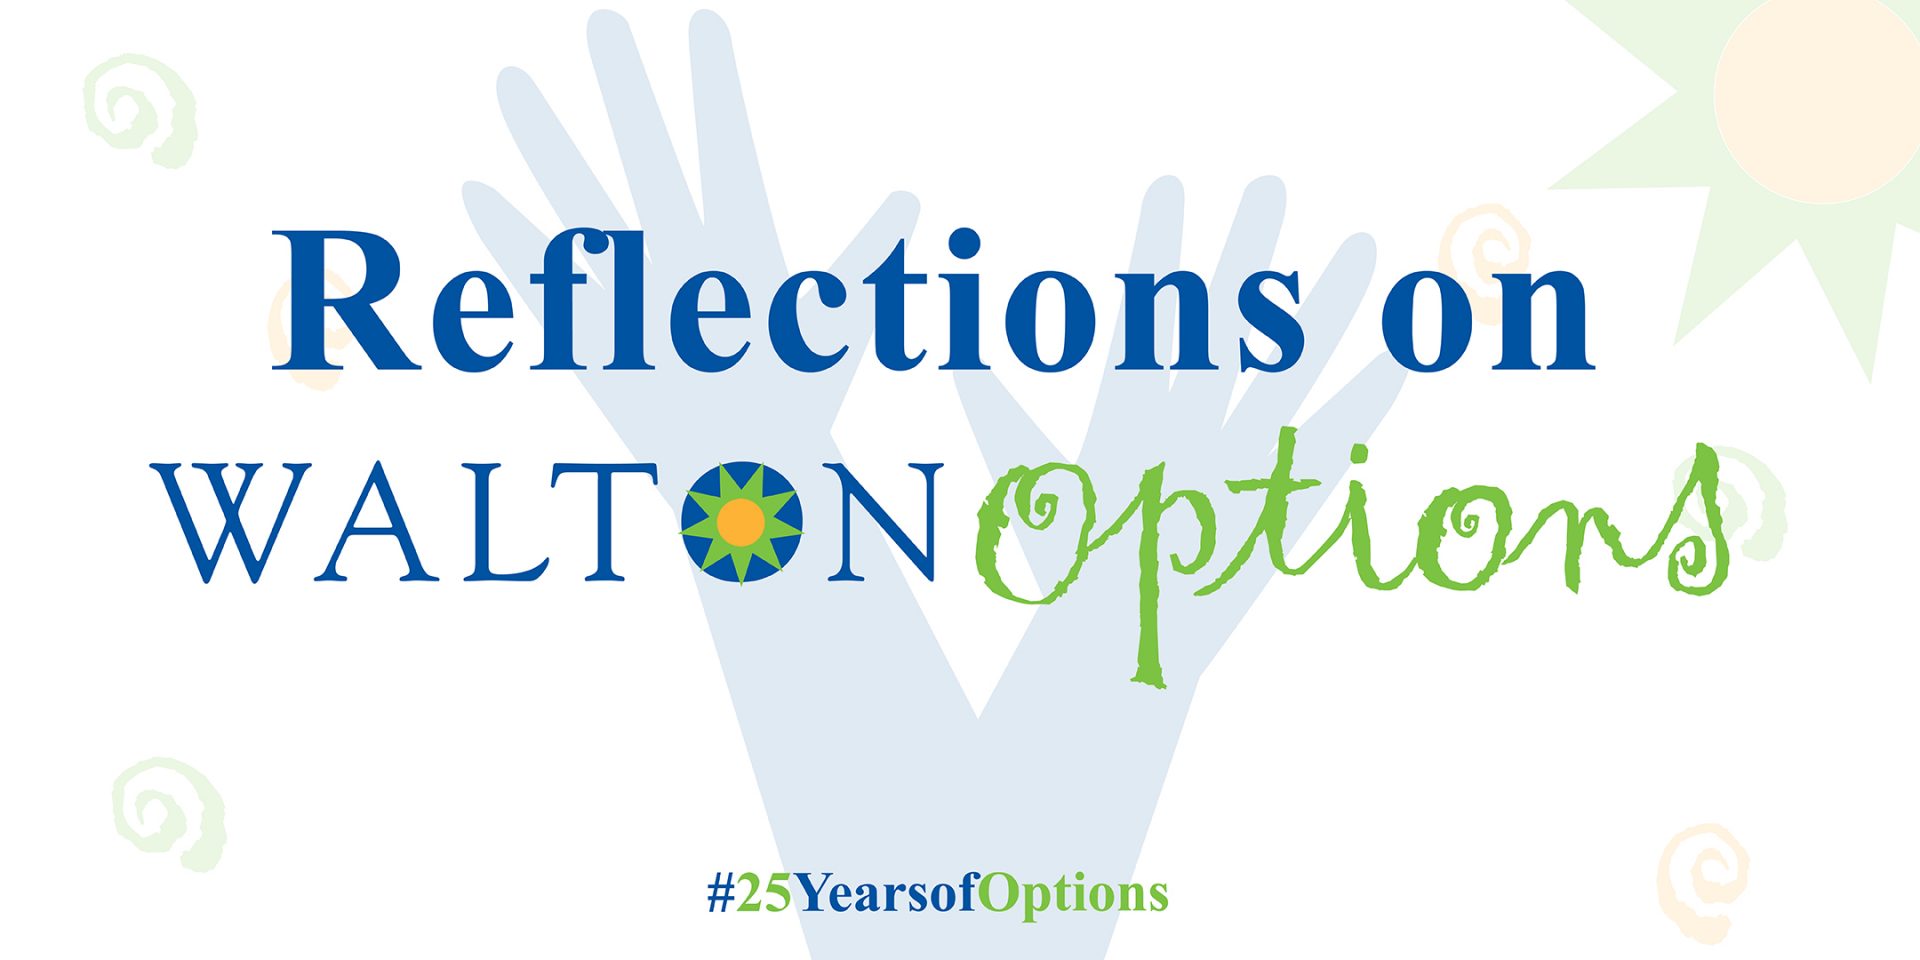 Header design: Green and Blue text reads Reflections on Walton Options, #25YearsofOptions over a white background with the graphic of two blue hands, a green and yellow sun and green and yellow swirls.